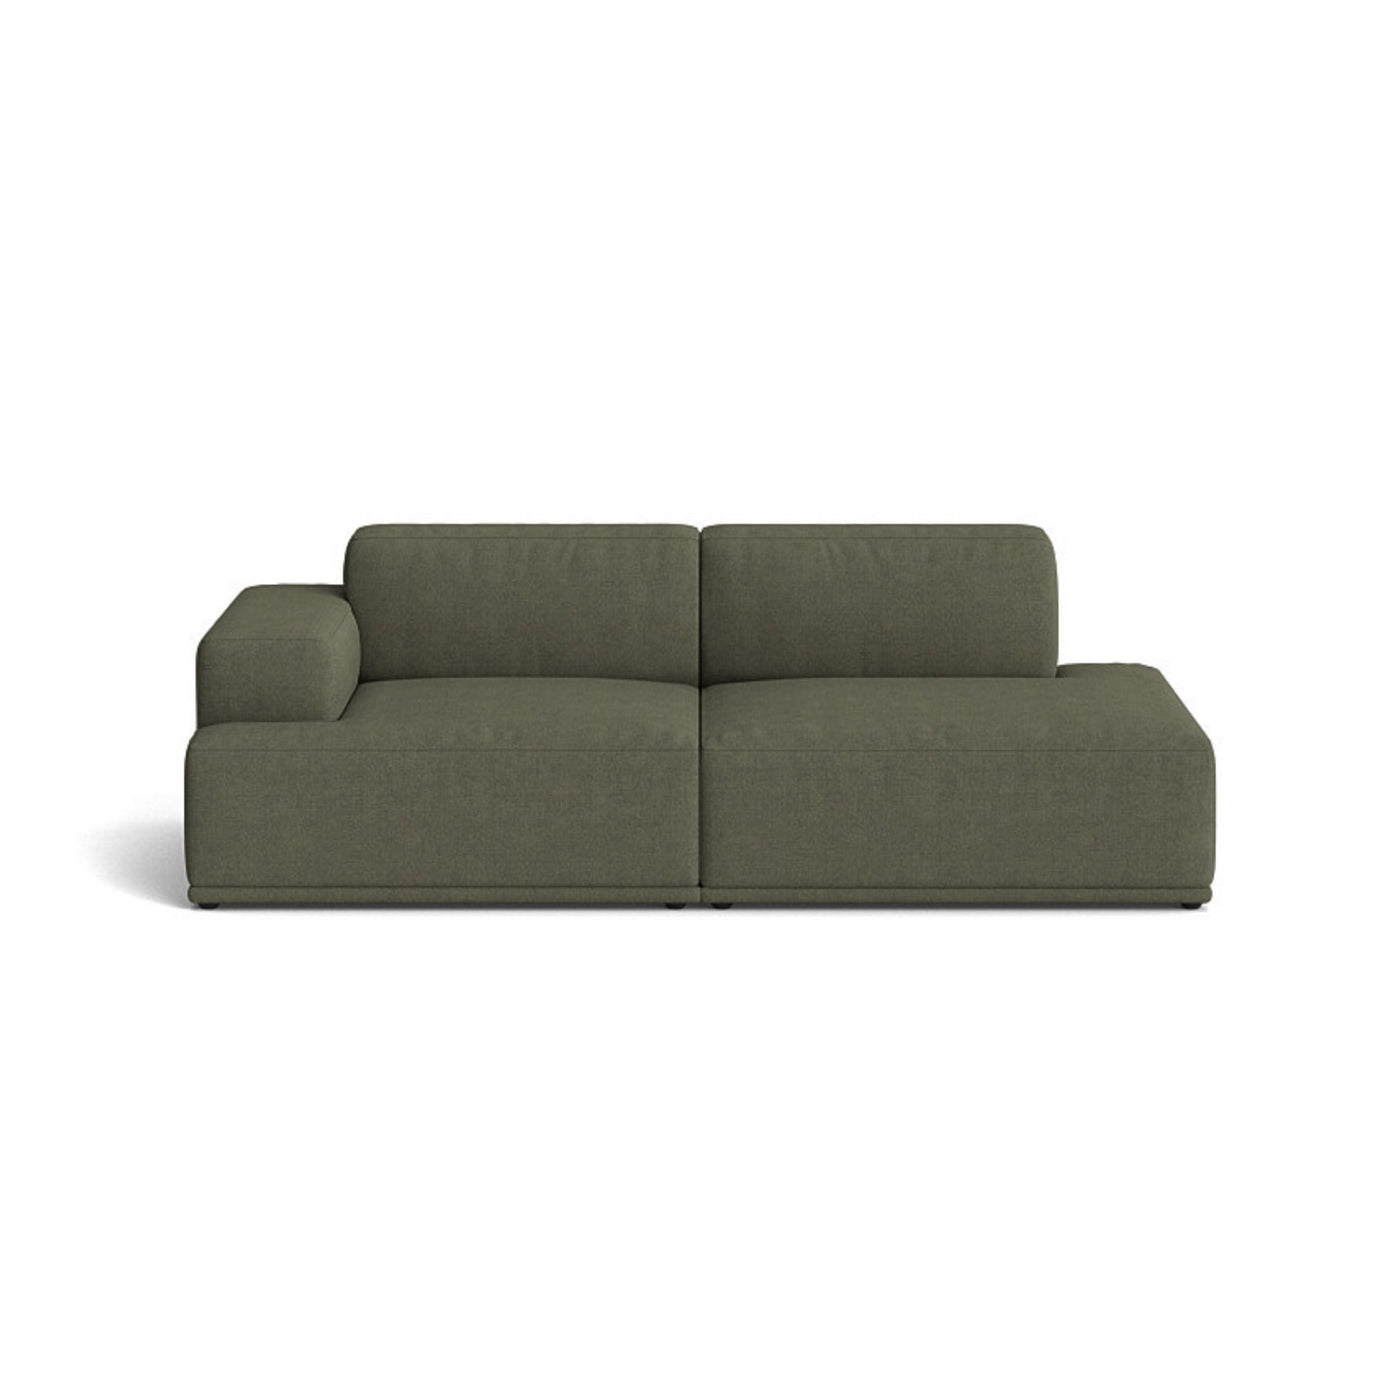 Muuto Connect Soft Modular 2 Seater Sofa, configuration 2. made-to-order from someday designs. #colour_fiord-961